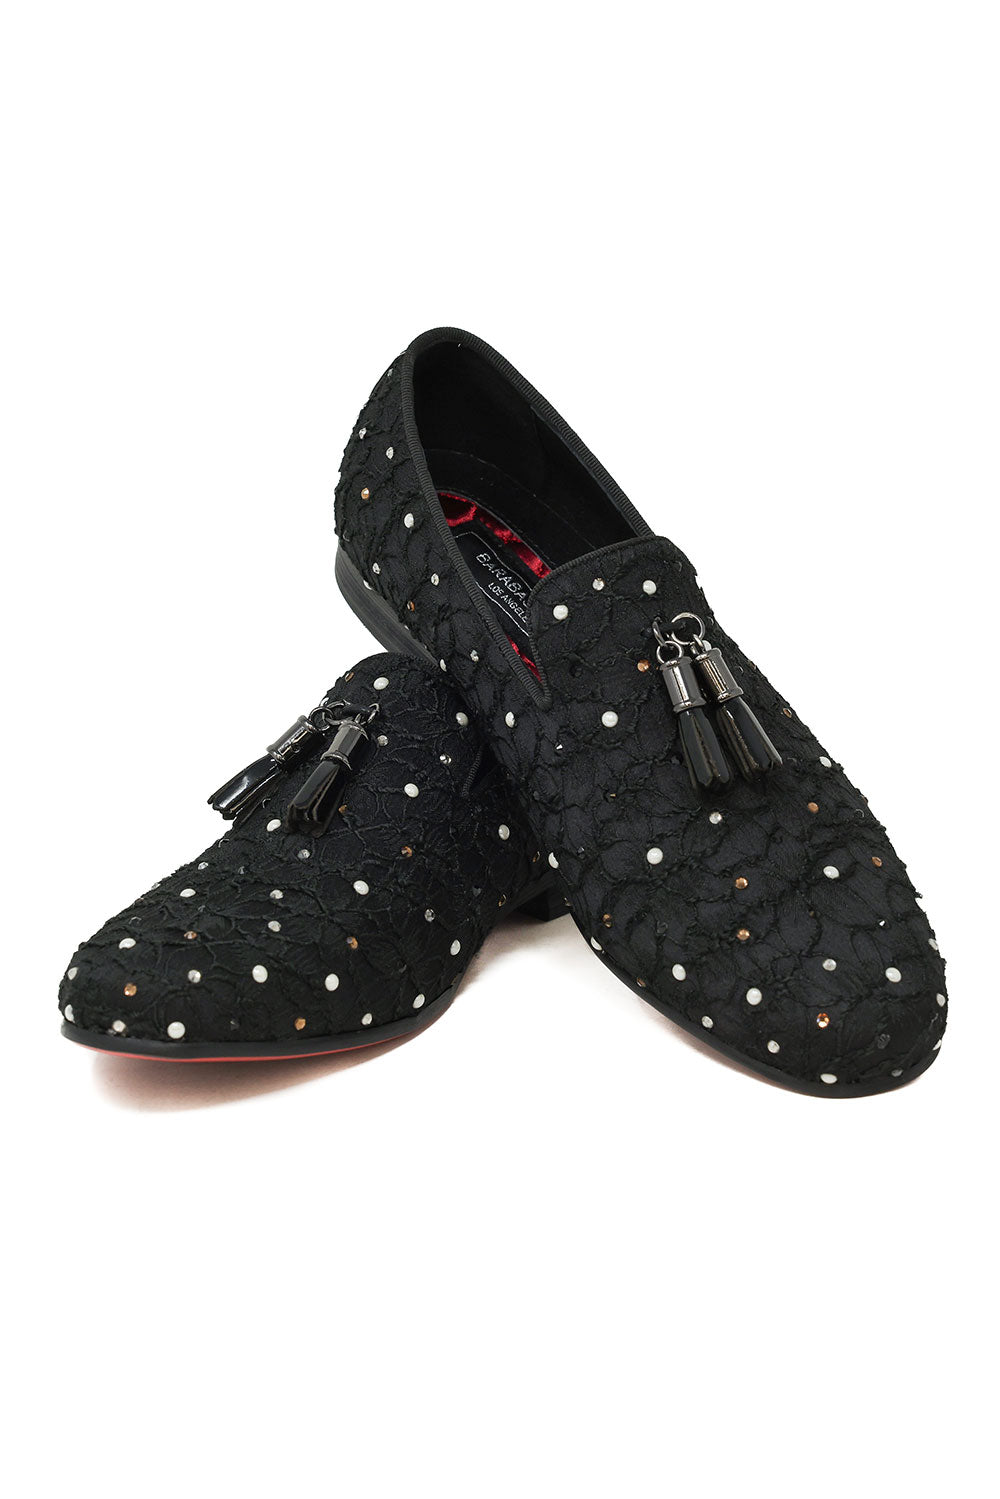 Man Red Bottoms Dress Shoes Designers Low Flat Rivets Embroidery